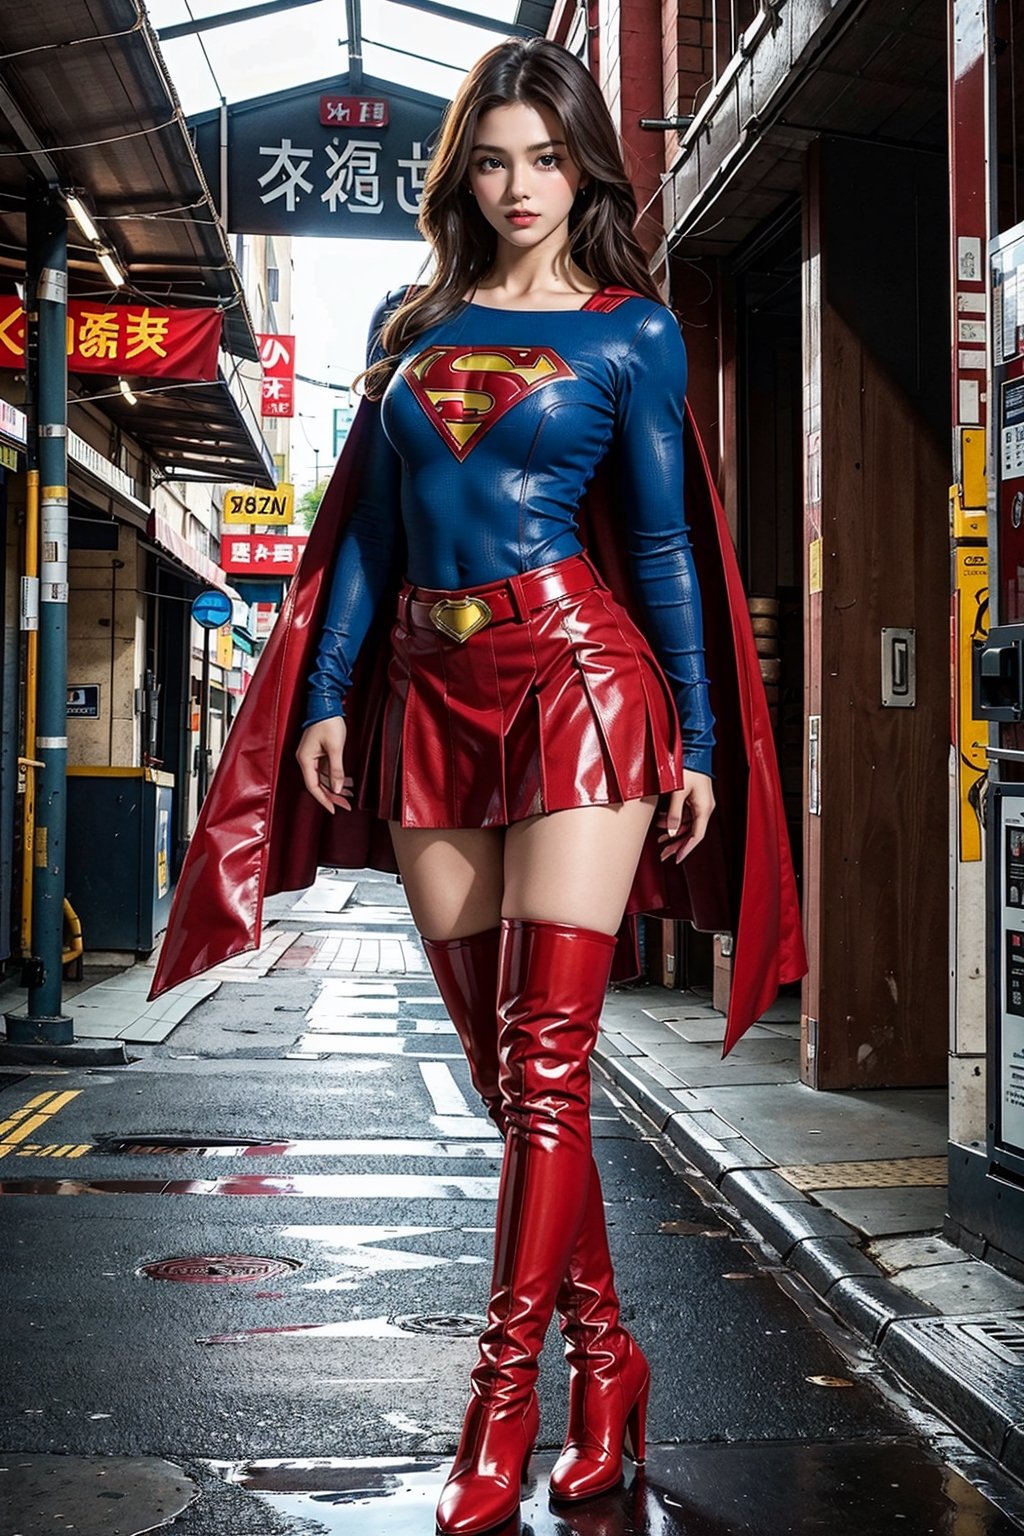 1girl, long black hair,supergirl,wearing Supergirl's blue tight uniform,perfect,red Boots higher than knees,Red miniskirt,Red long cape,full body,Bright colors,Bright red Boots, red miniskirt,Huge chest,Boots over the knee,Clothes are tied to skirts,Red miniskirt,Female model posen,Red over-the-knee pointed high-heeled boots,full body,running in the middle of the road,full body,tall girl,long boots,Red long cape,Boots longer than legs,Chinese supergirl,18years old,Don't show belly,Extremely long tip boots,red skirt,full body,supergirl's tight suit,Don't show knees,Knees wrapped in boots,strong girl,Pointy high-heeled boots,thin high heels,Uniforms and skirts are connectedUniforms and skirts are connected,Don't show your stomach,red skirt,full body,Extra long red boots,Golden Supergirl Belt,One-piece tight uniform
,Show the outline of the muscles,Red miniskirt and long cape,Boots must be over the knee,Integrated coats,Golden Supergirl Belt,Red miniskirt,Full of muscles,Tall and strong,Sexy,Full of muscle beauty,red dress,The skirt must be red.